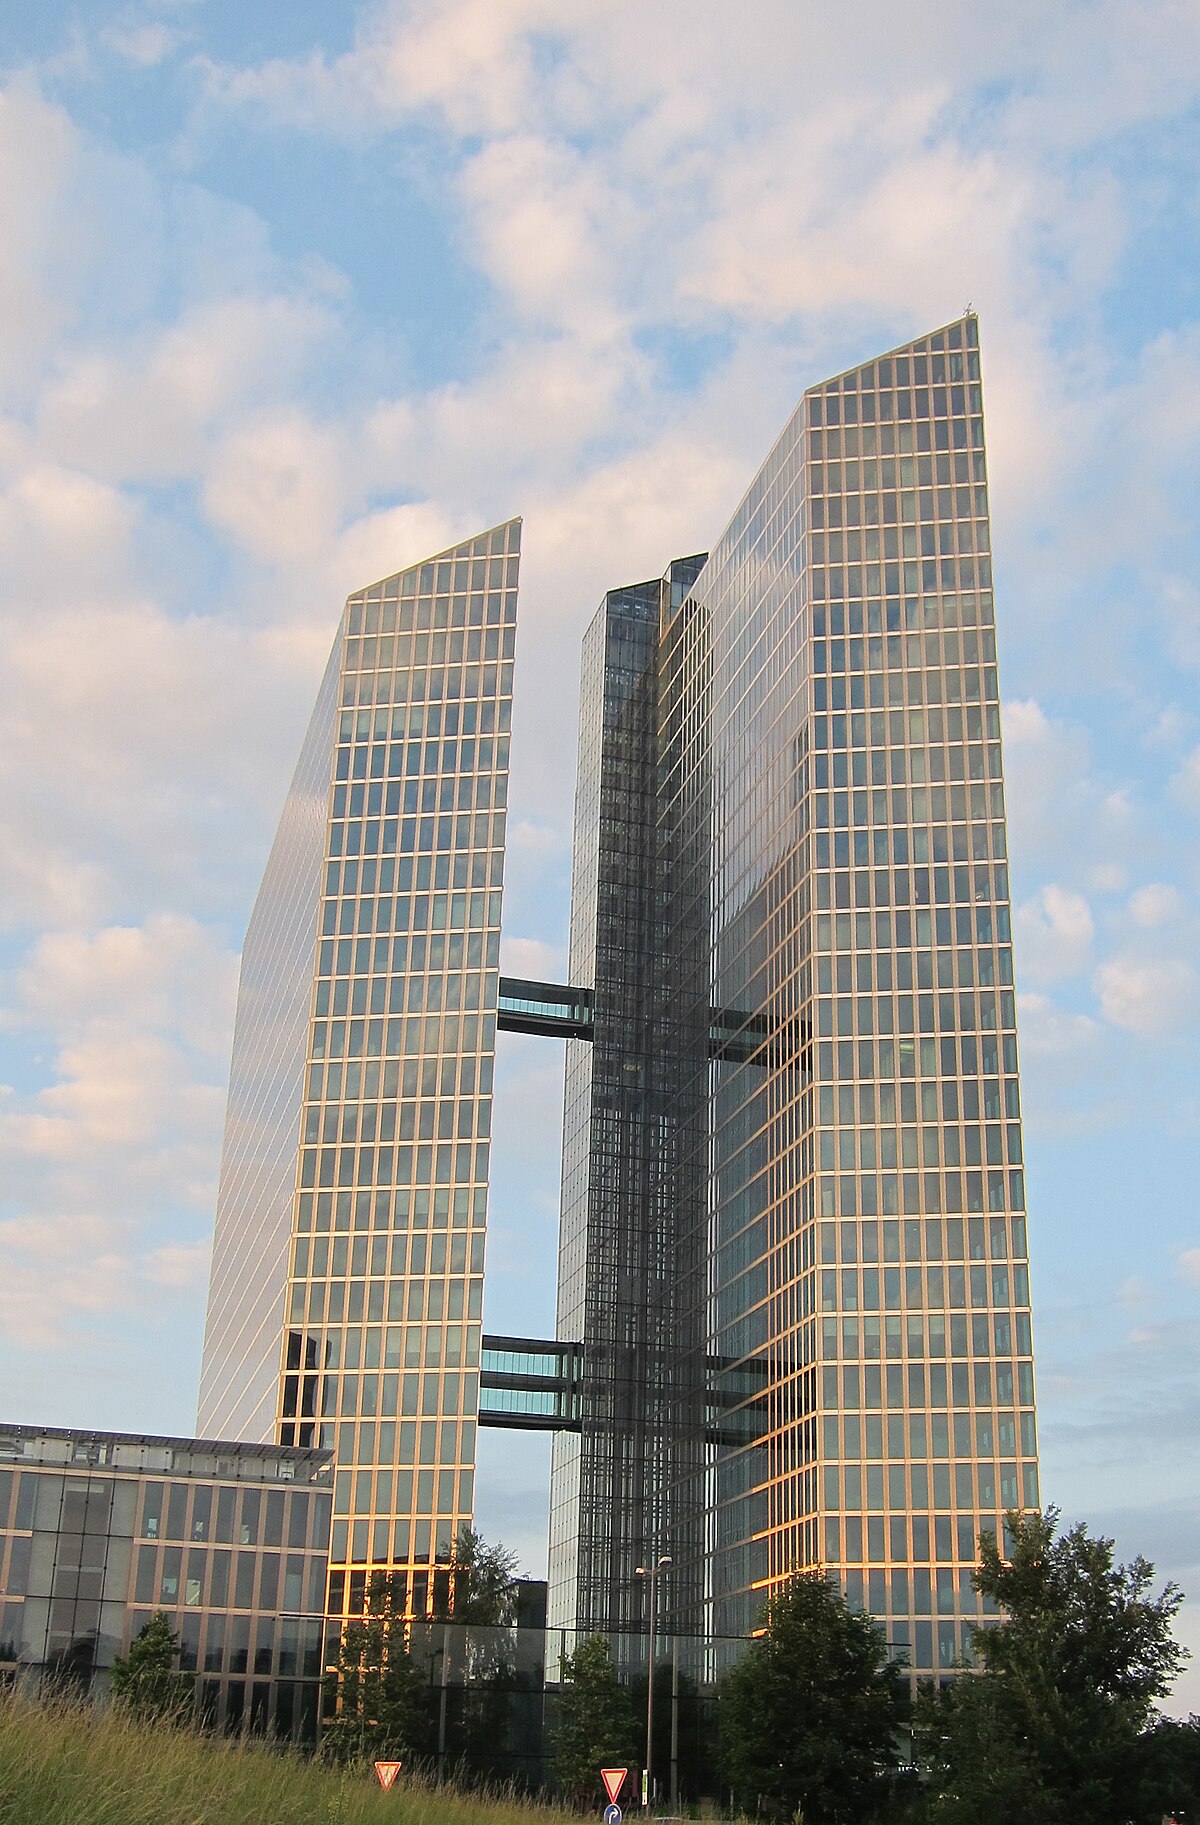 File:Highlight Towers Munich looking - Wikimedia Commons